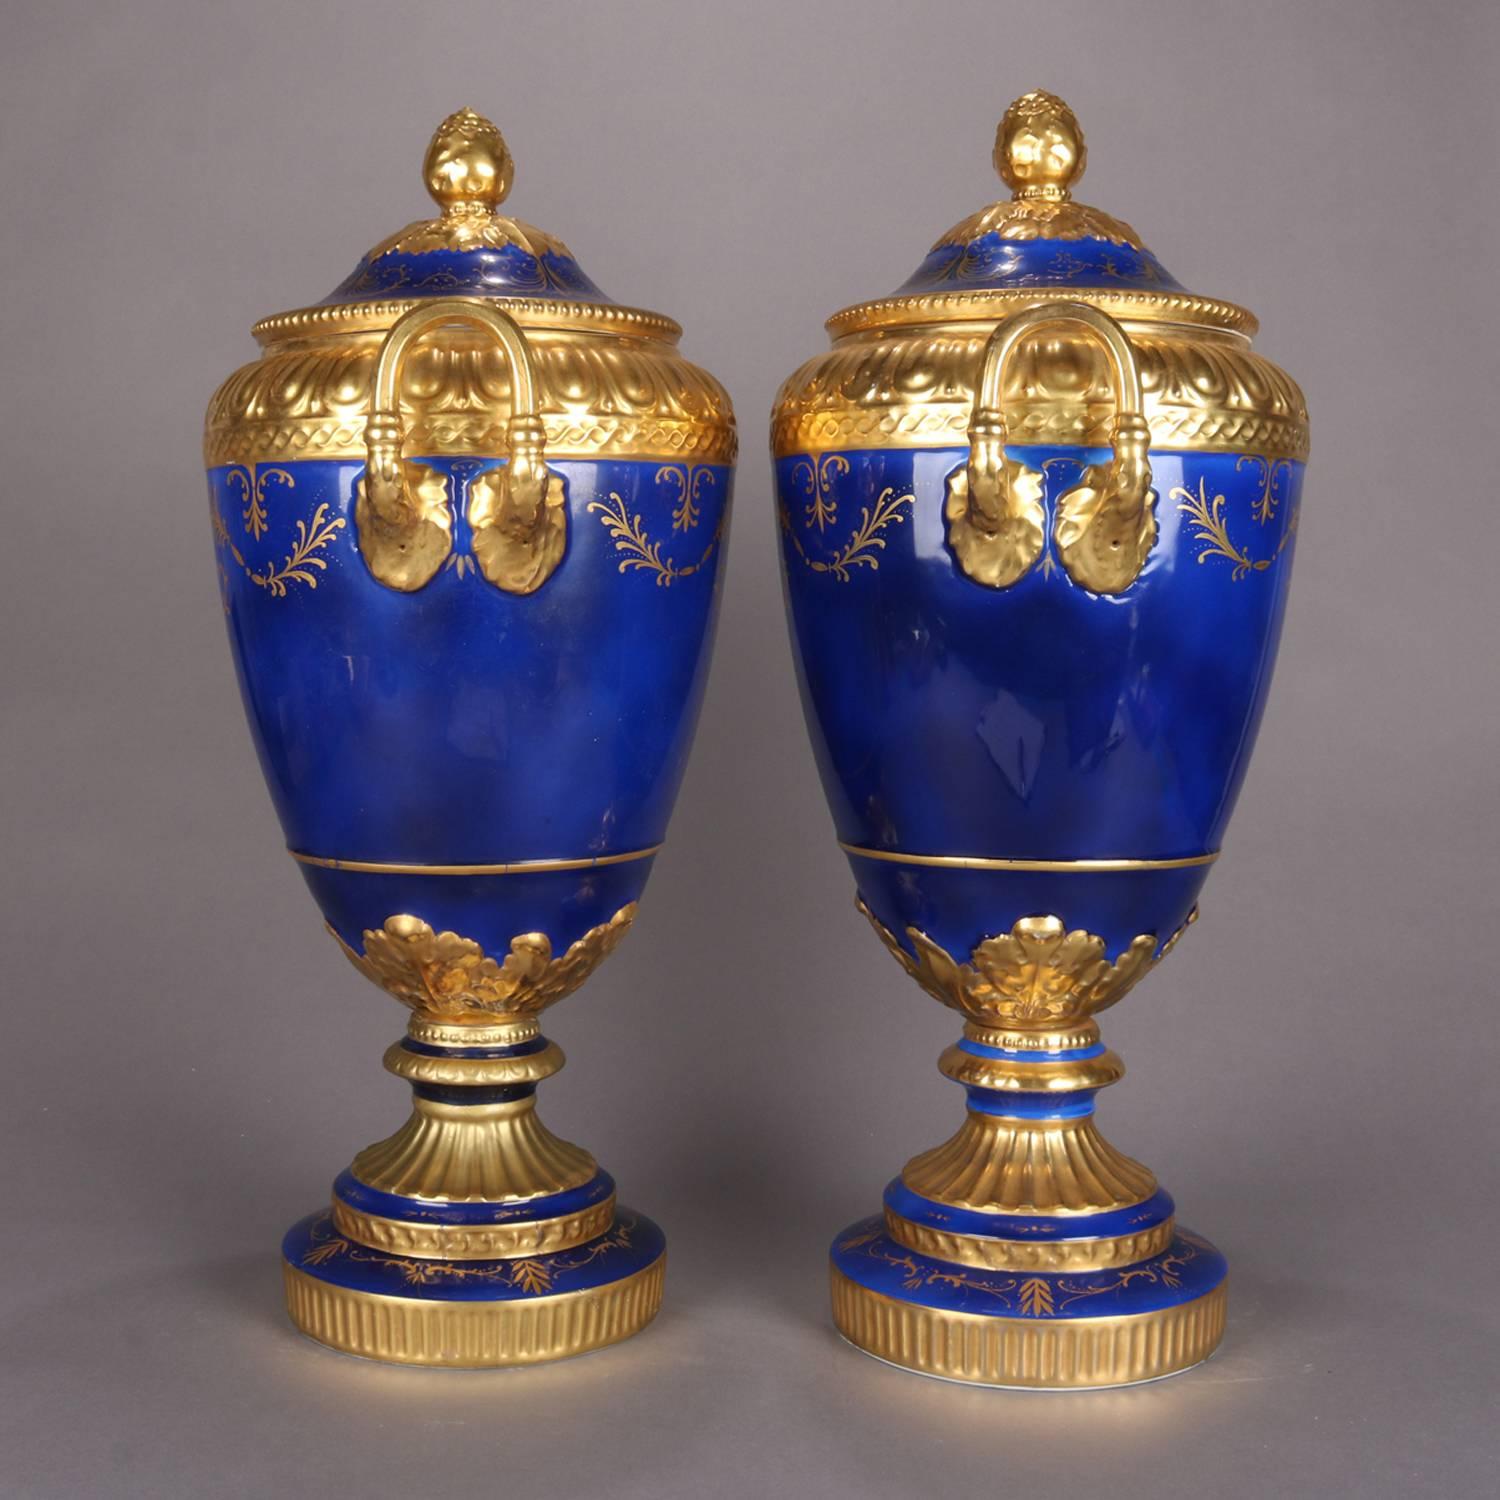 20th Century Monumental French Sevres School Hand-Painted Cobalt and Gilt Porcelain Urns